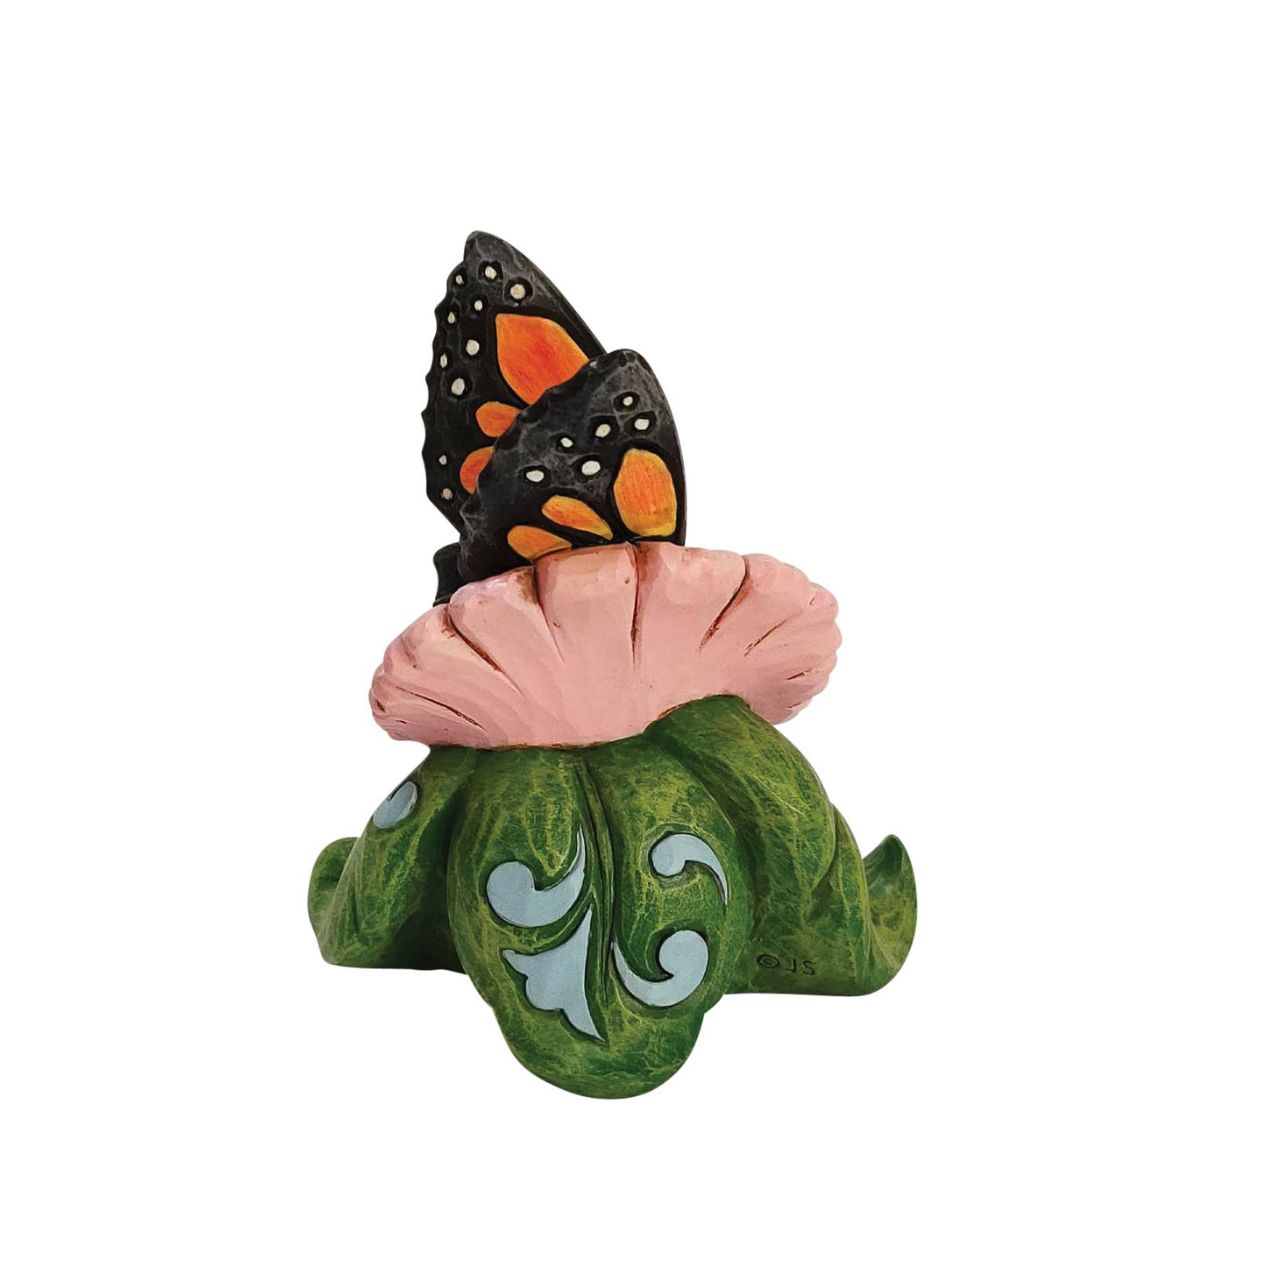 Mini Monarch Butterfly Figurine by Jim Shore  The monarch butterfly considered to be the king of butterflies and the most beautiful in all the world. Bring some of that beauty into your home with this astonishing bust by Jim Shore. Resting on a rosemale flower, it shows off its enchanting wings.